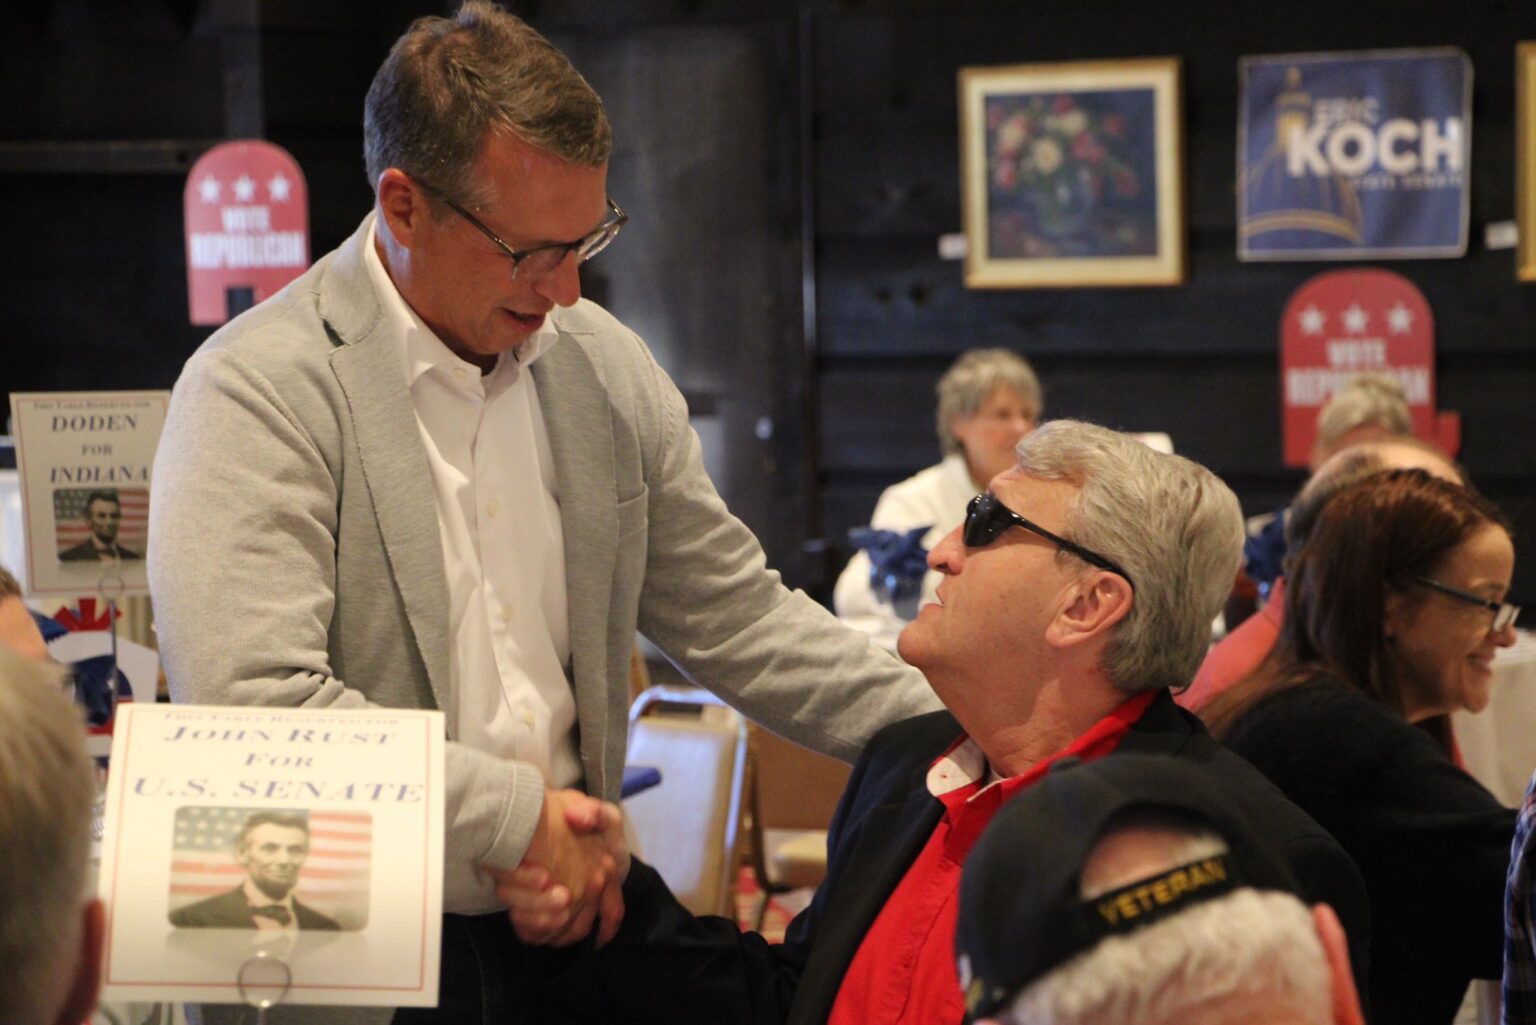 GOP candidate Eric Doden shakes hands with a voter at a Brown County event. The gubernatorial candidate has focused on small towns, zero-cost adoption and more over his three-year campaign. (Photo courtesy of Doden campaign)